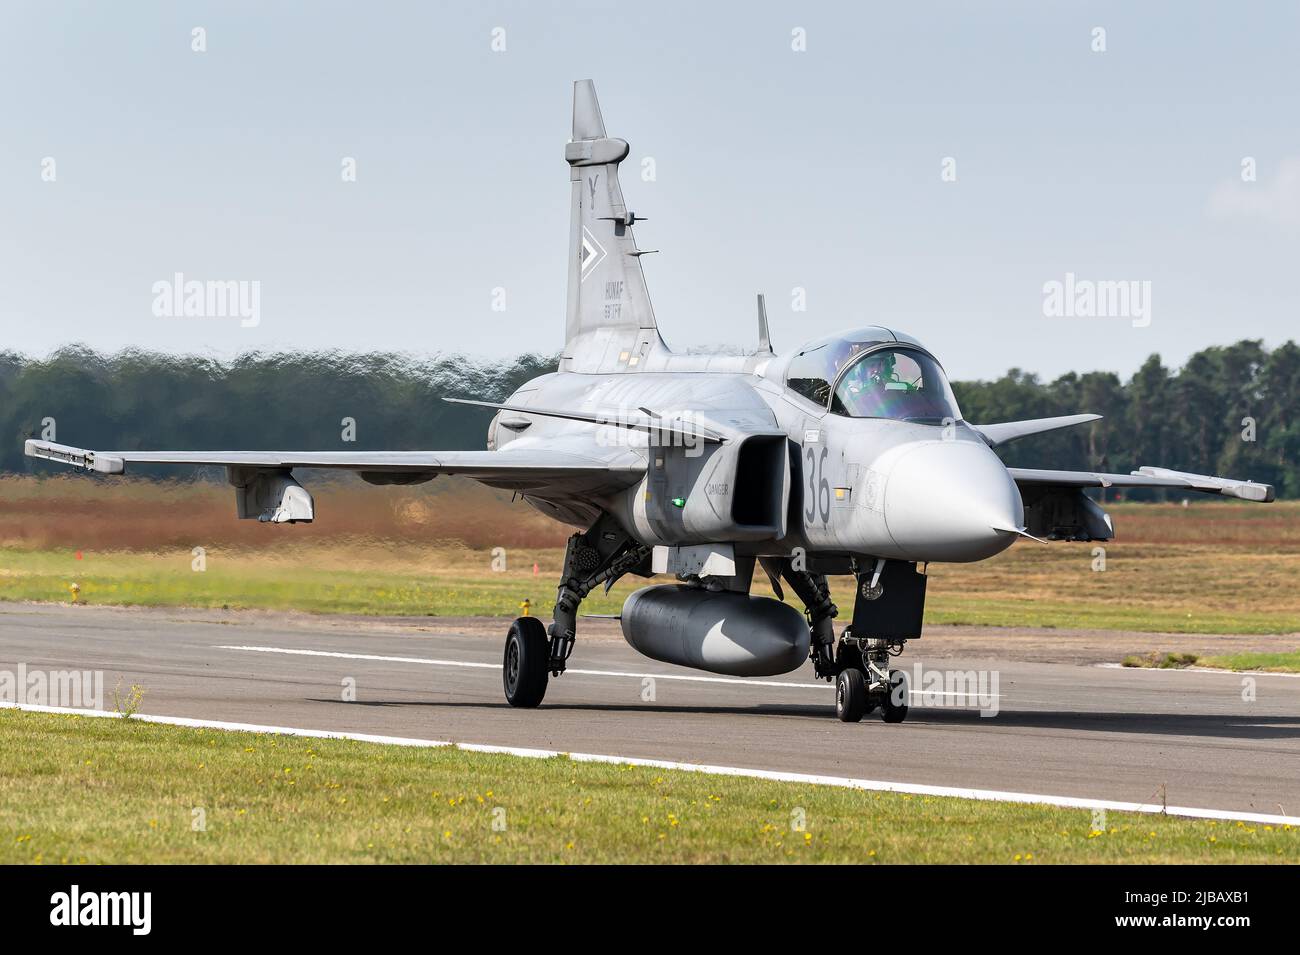 A Saab JAS 39 Gripen fighter jet from the Kecskemét Air Base of the Hungarian Air Force. Stock Photo